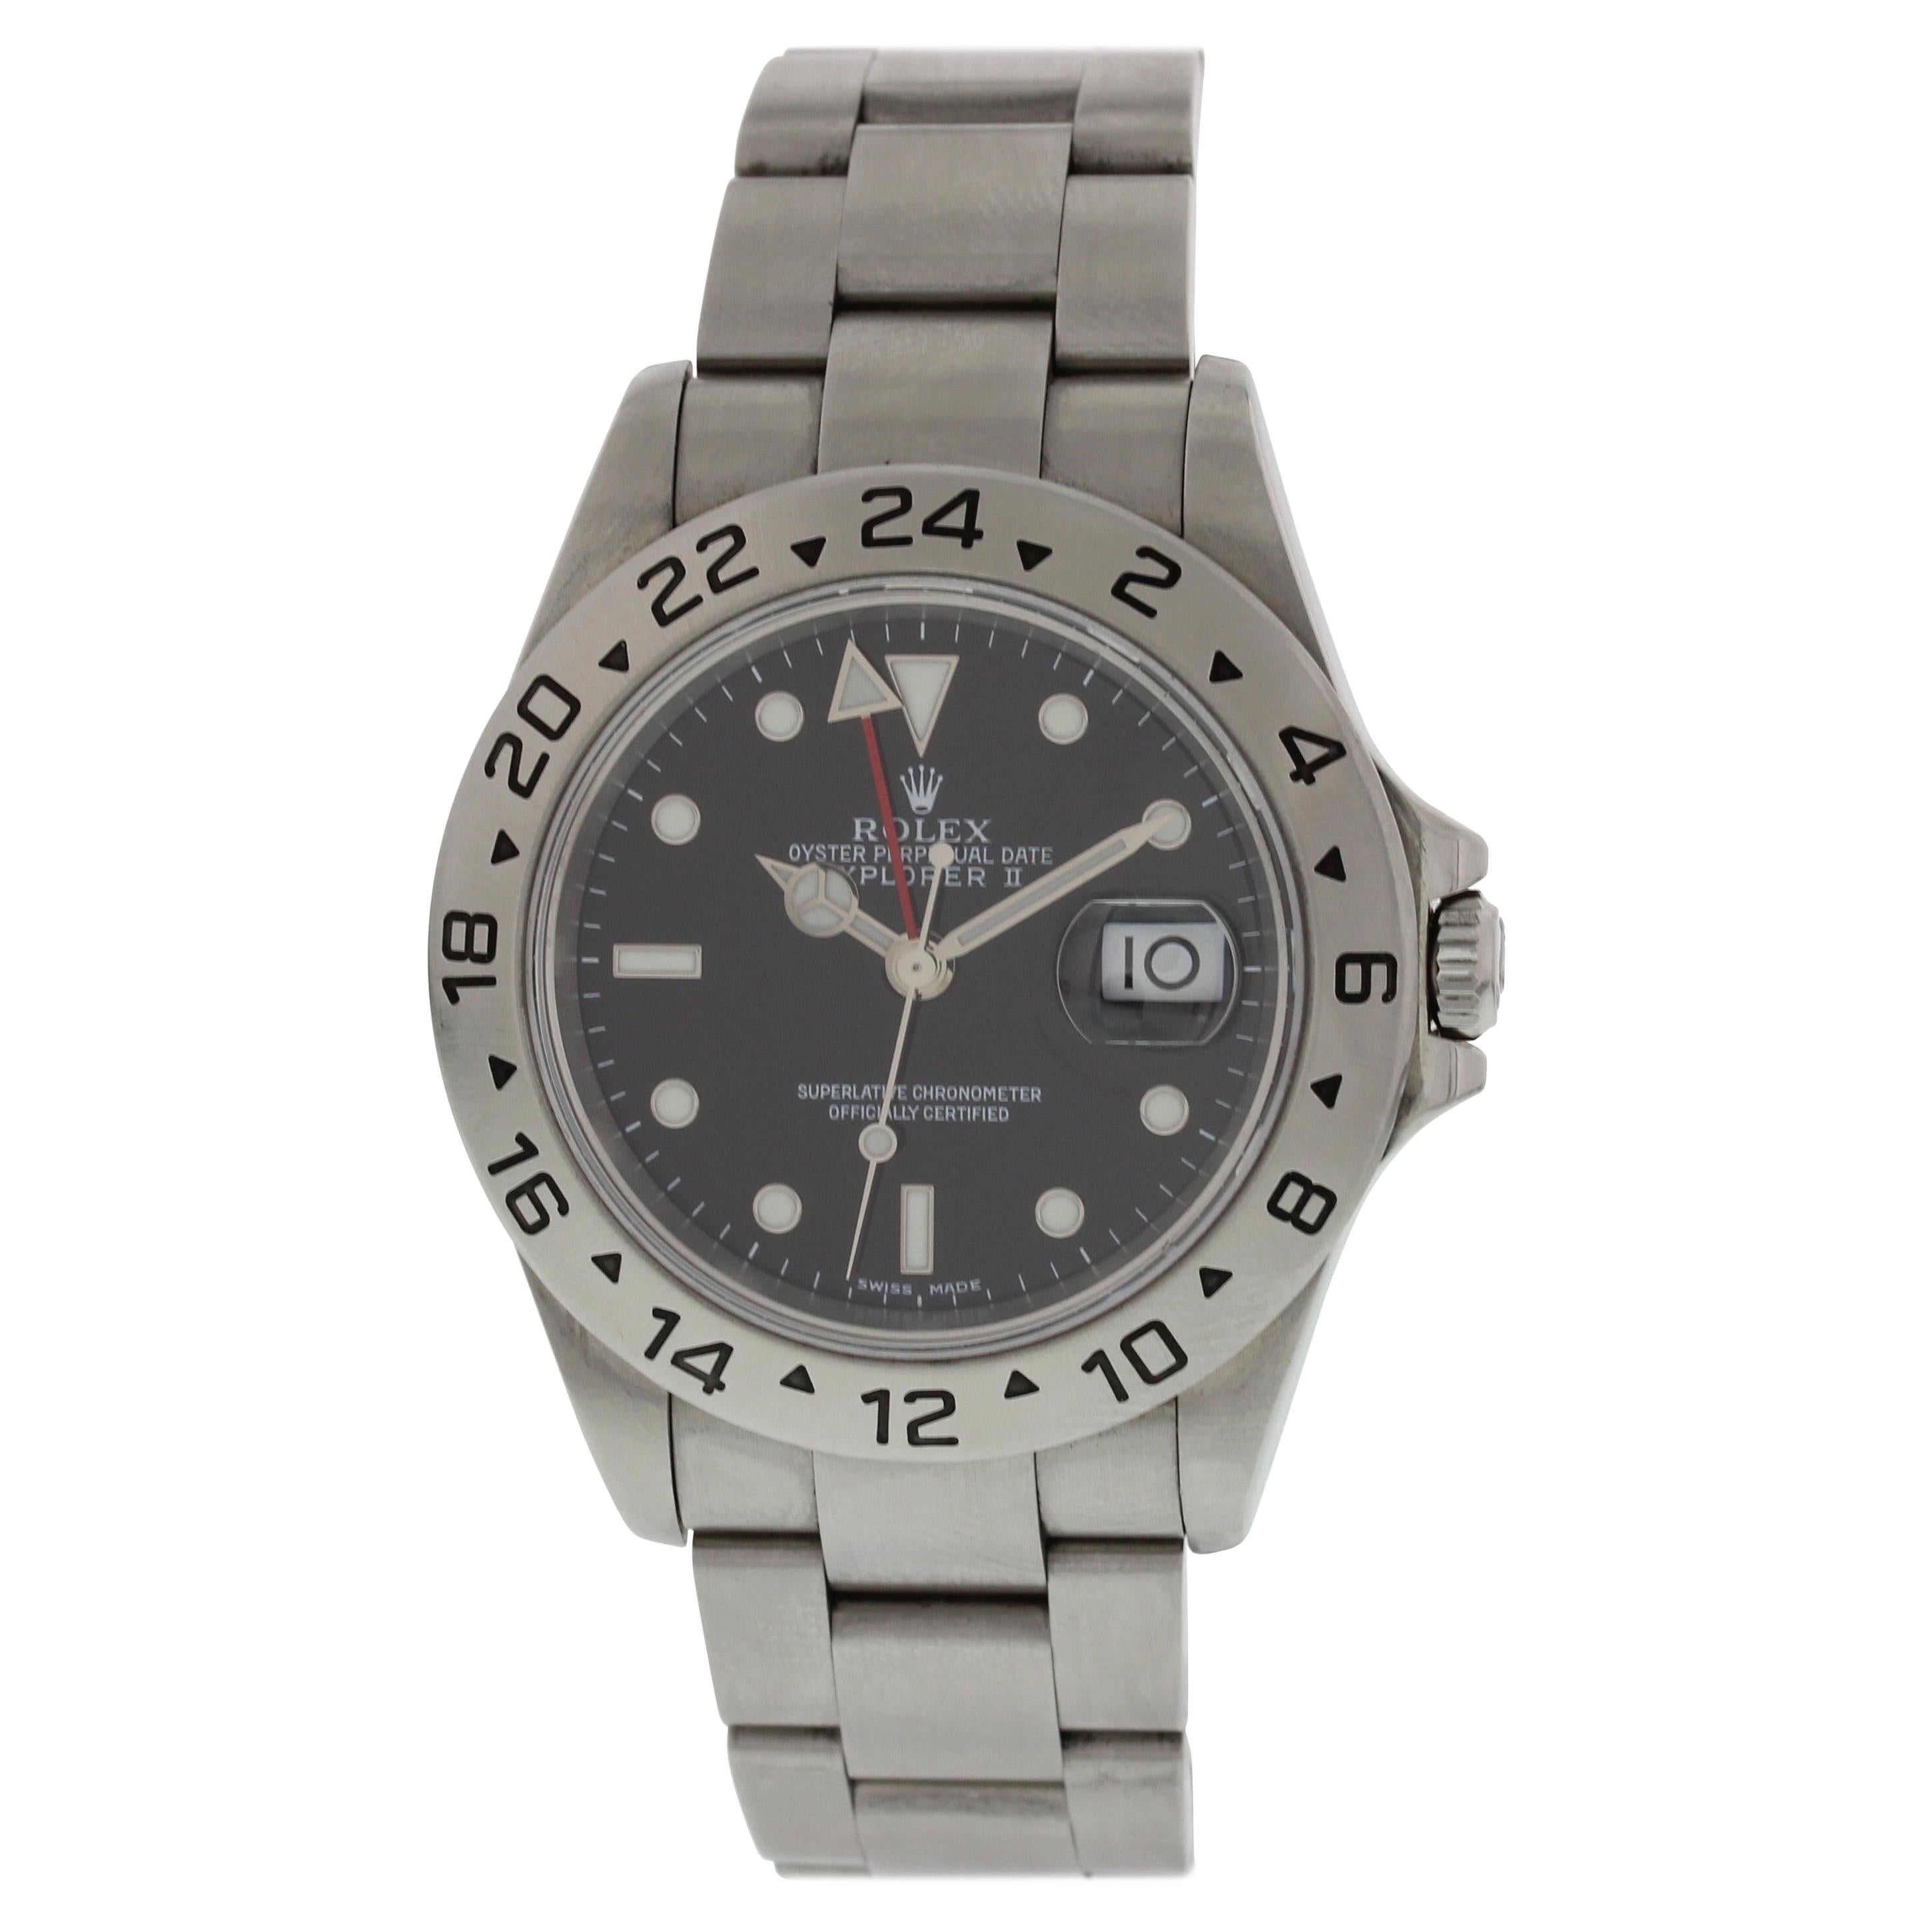 Rolex Oyster Perpetual Date Explorer II 16570 For Sale